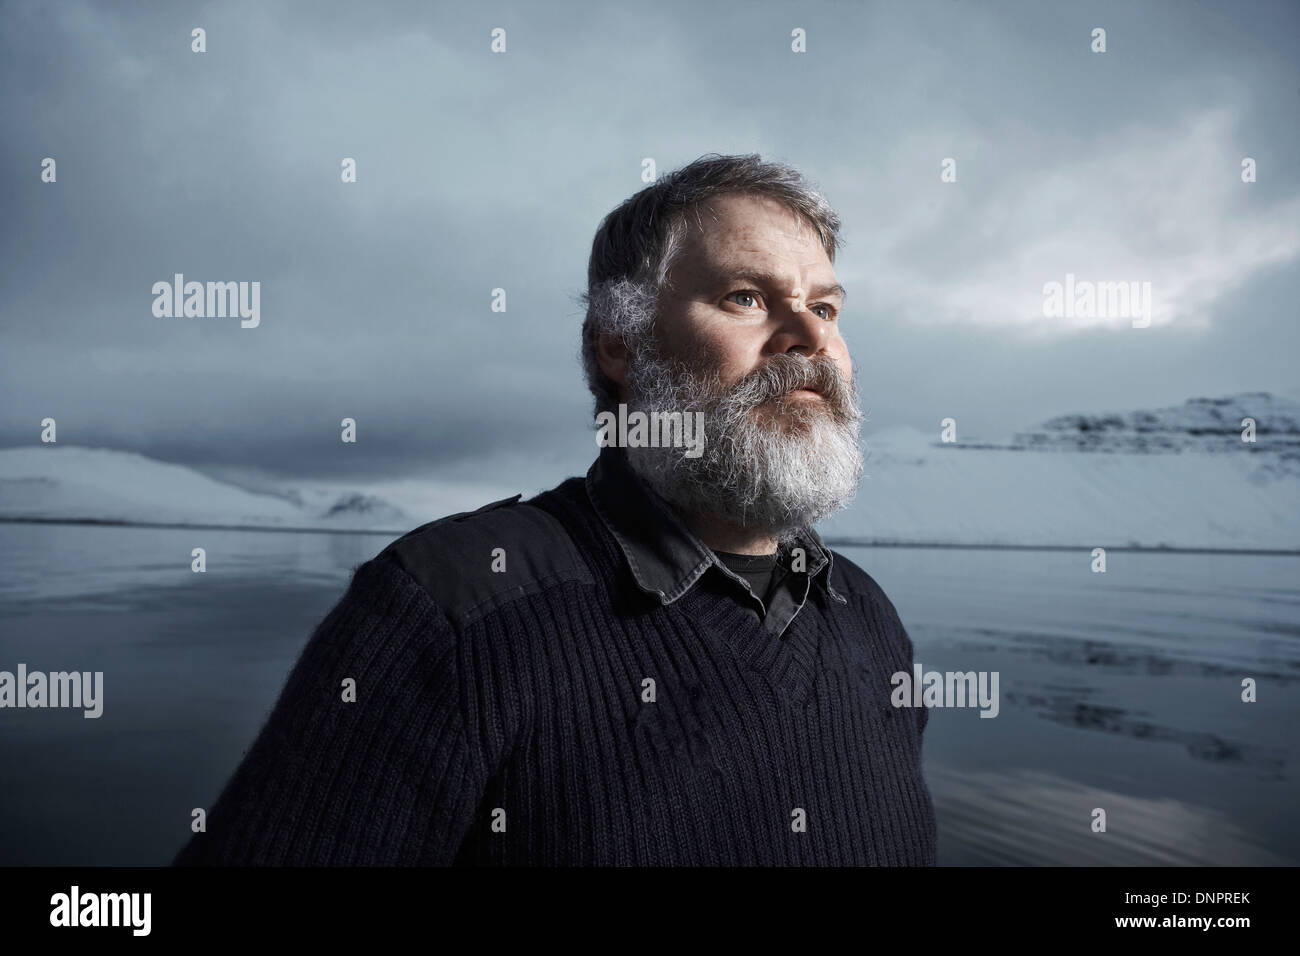 Fisherman With Gray Beard On His Boat In Winter Iceland Stock Photo Alamy